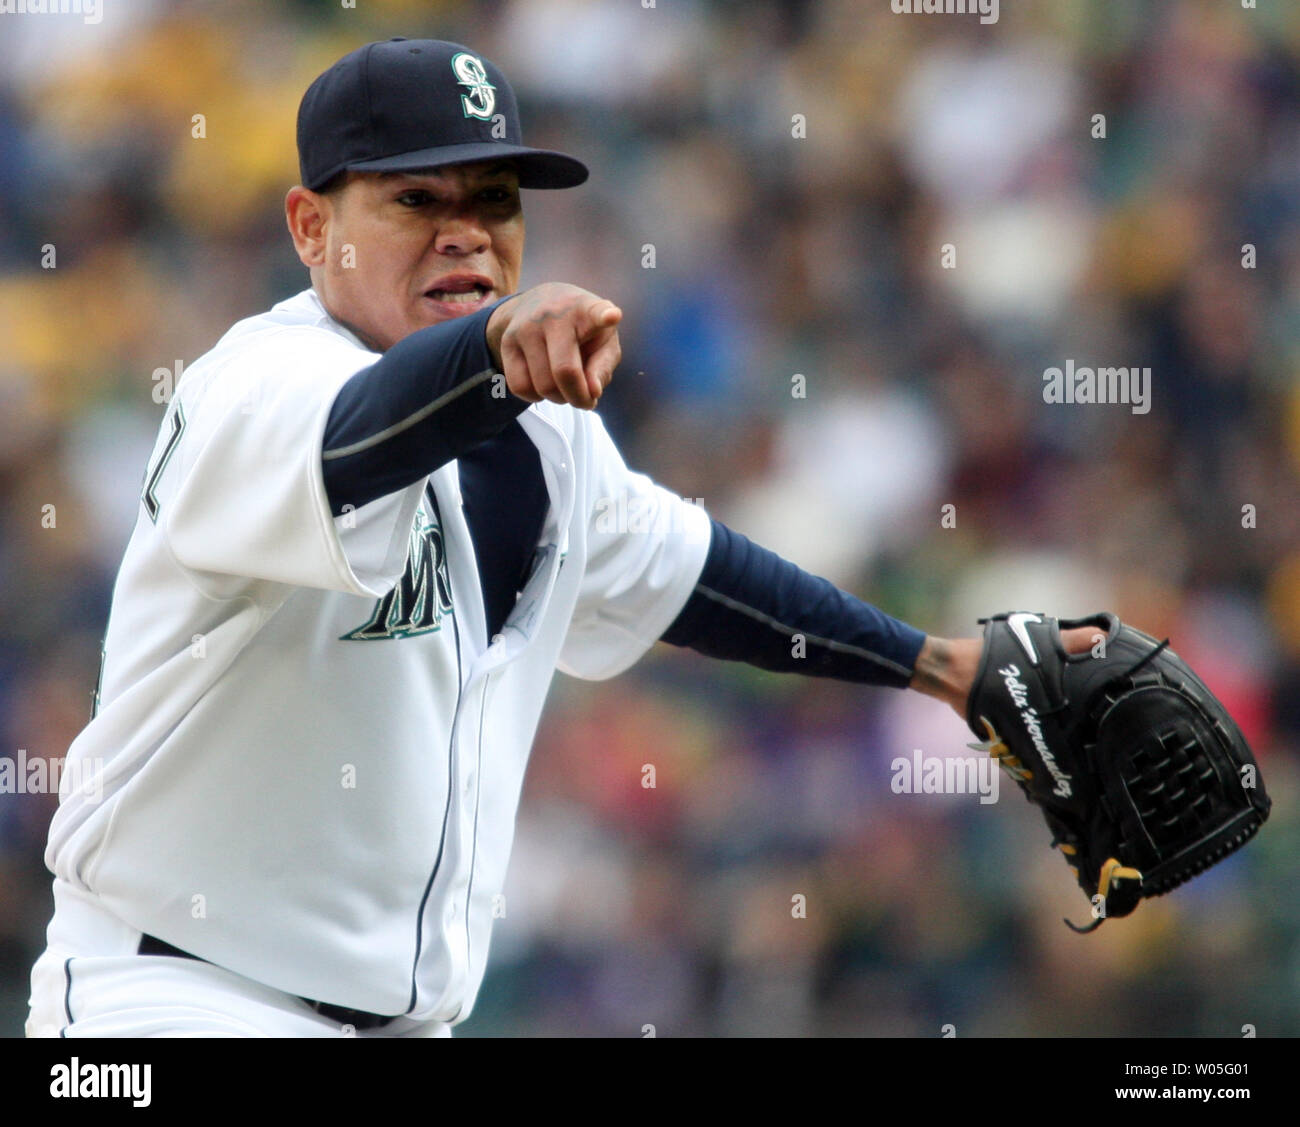 Felix Hernandez Cries On Mound In Likely Final Game With Mariners